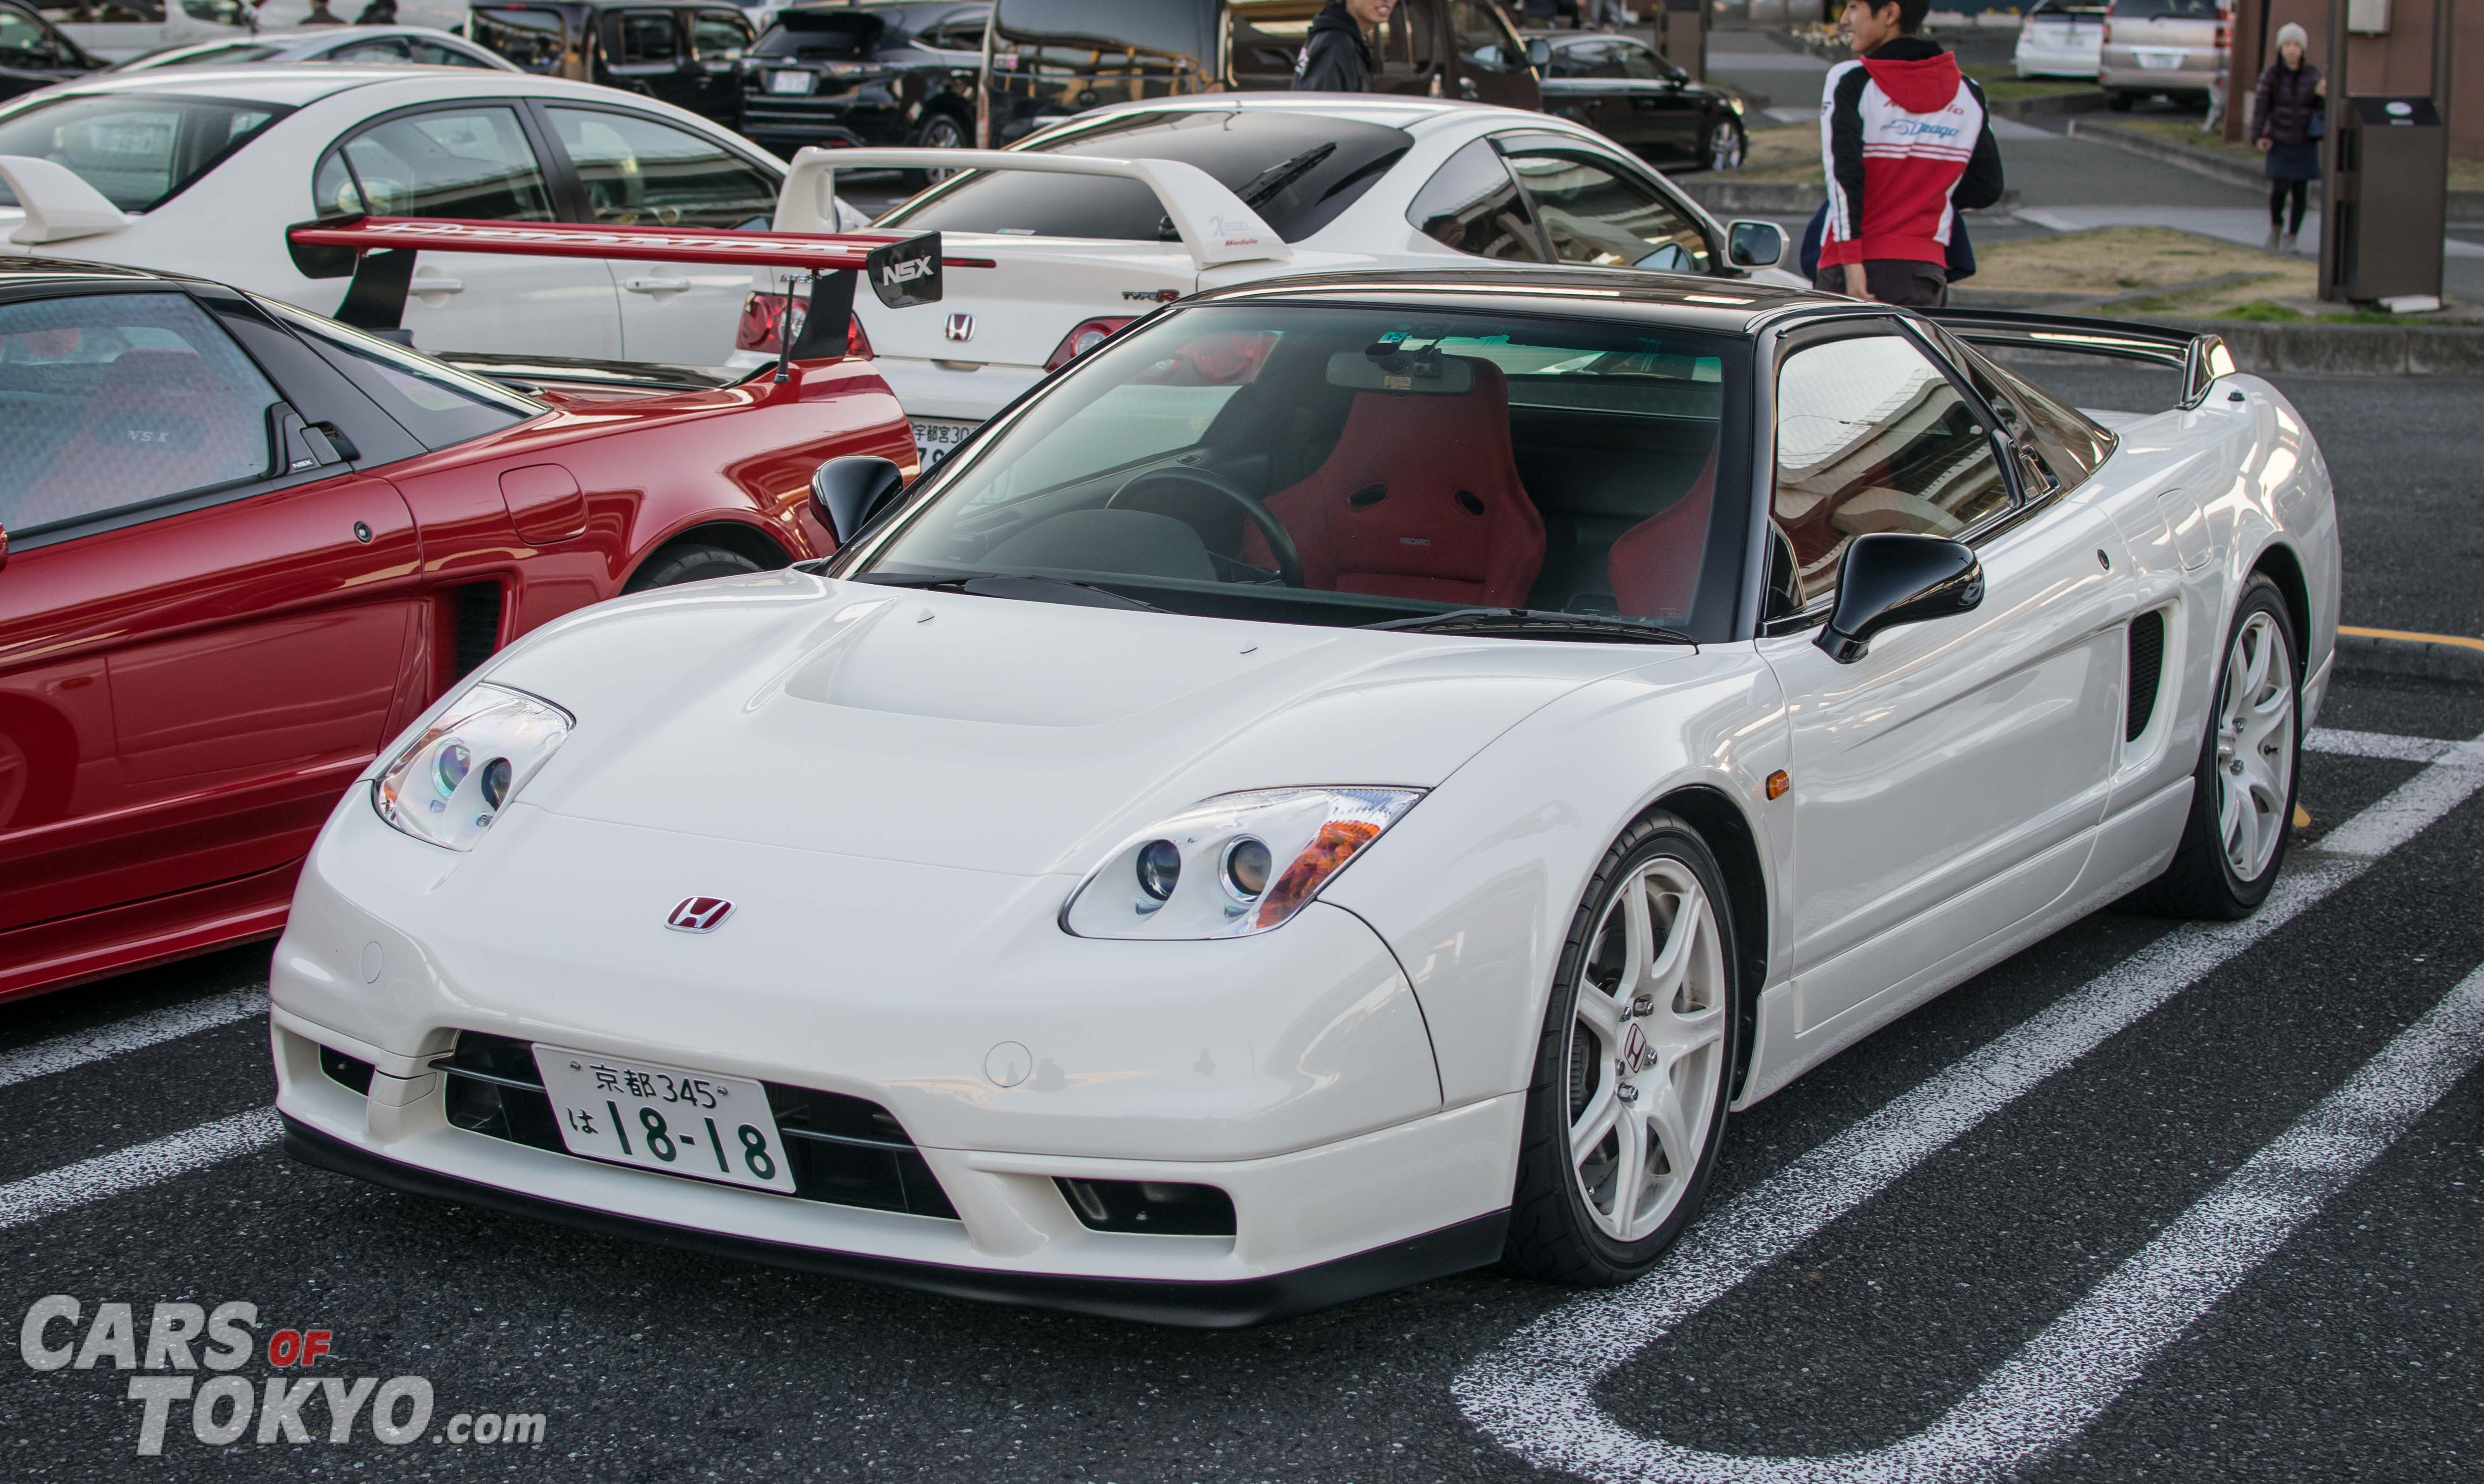 Cars of Tokyo NSX Type-R